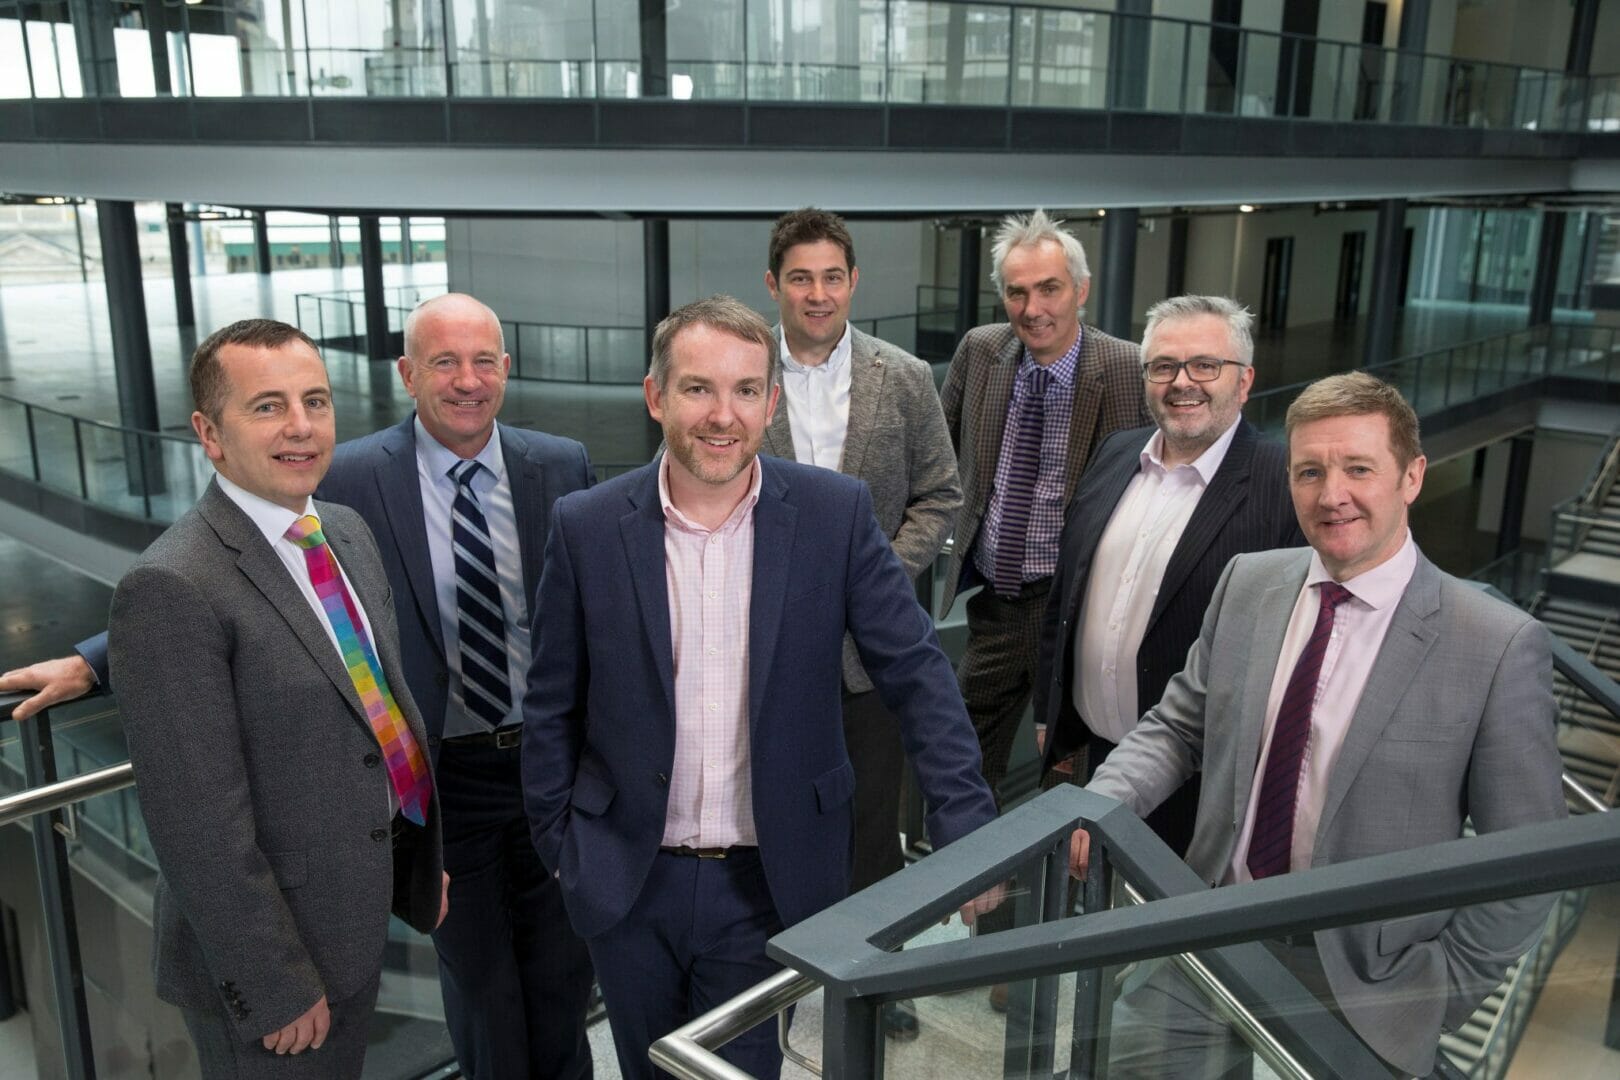 ISG hands over the keys to the door of BBC Wales Broadcast Centre @ISGplc